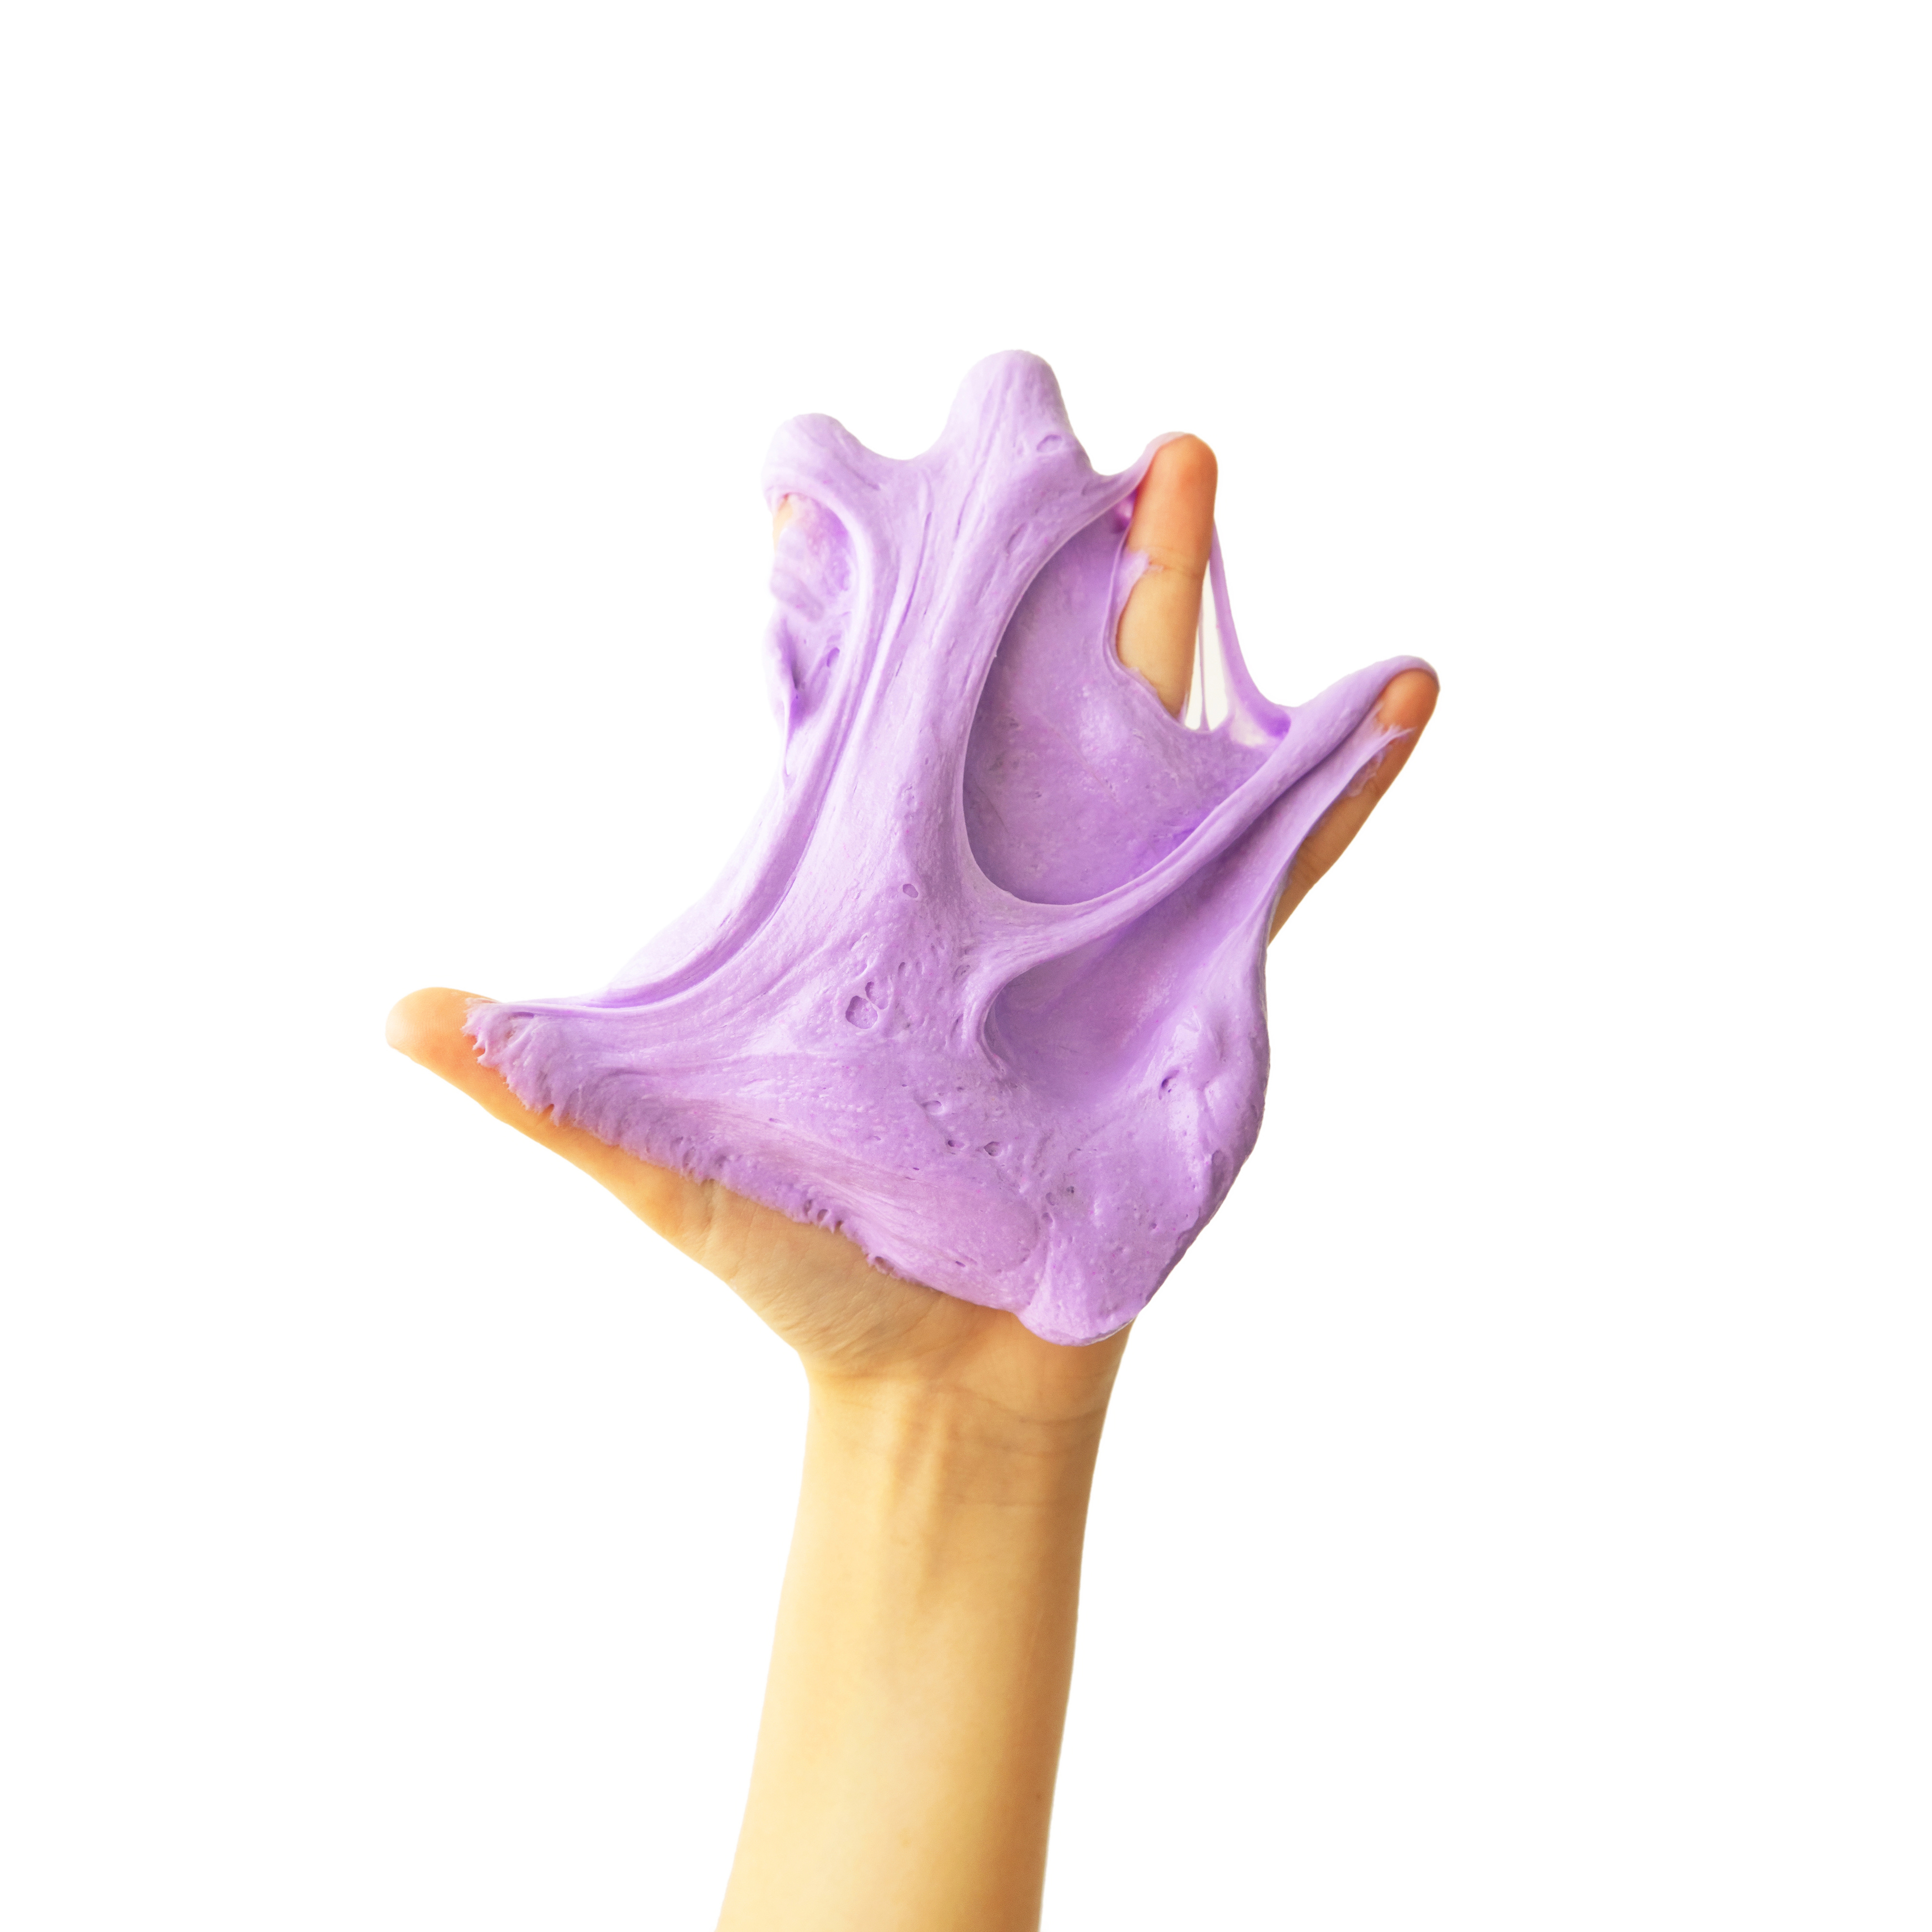 An open hand is shown in front of a white background with a sticky purple substance covering it. 